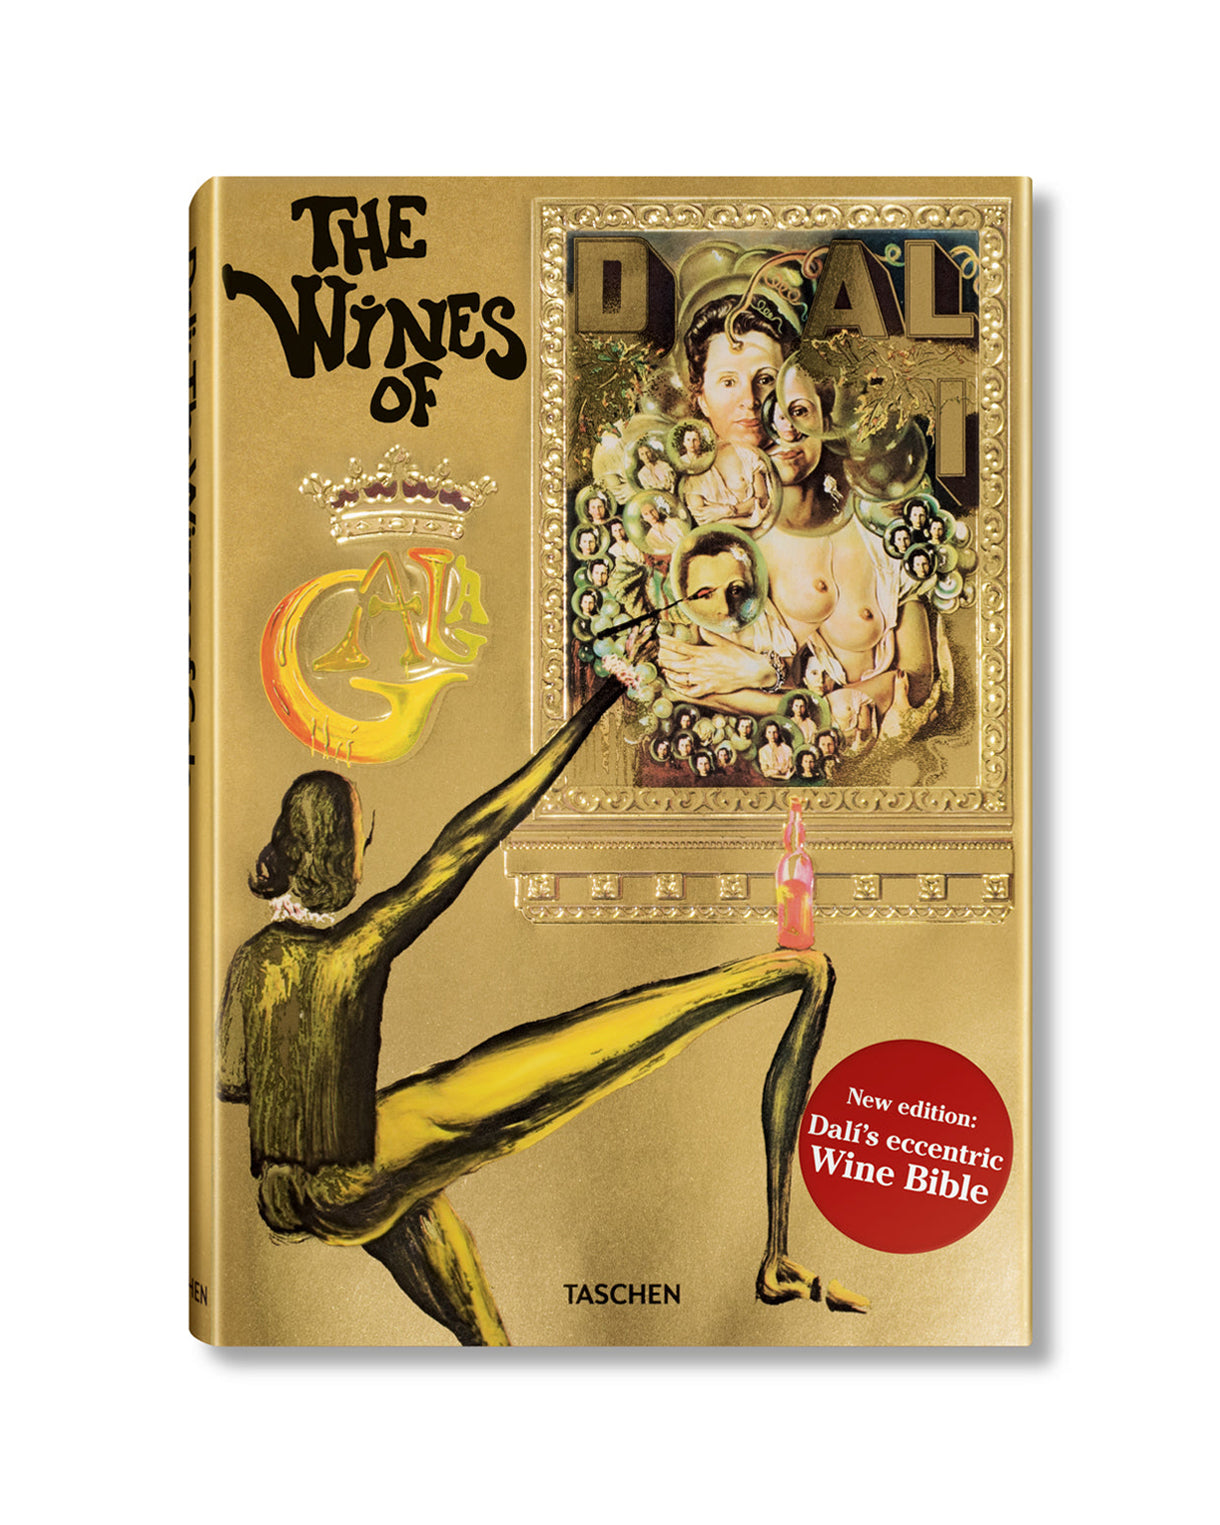 Dalí Wine Bible: The Wines of Gala